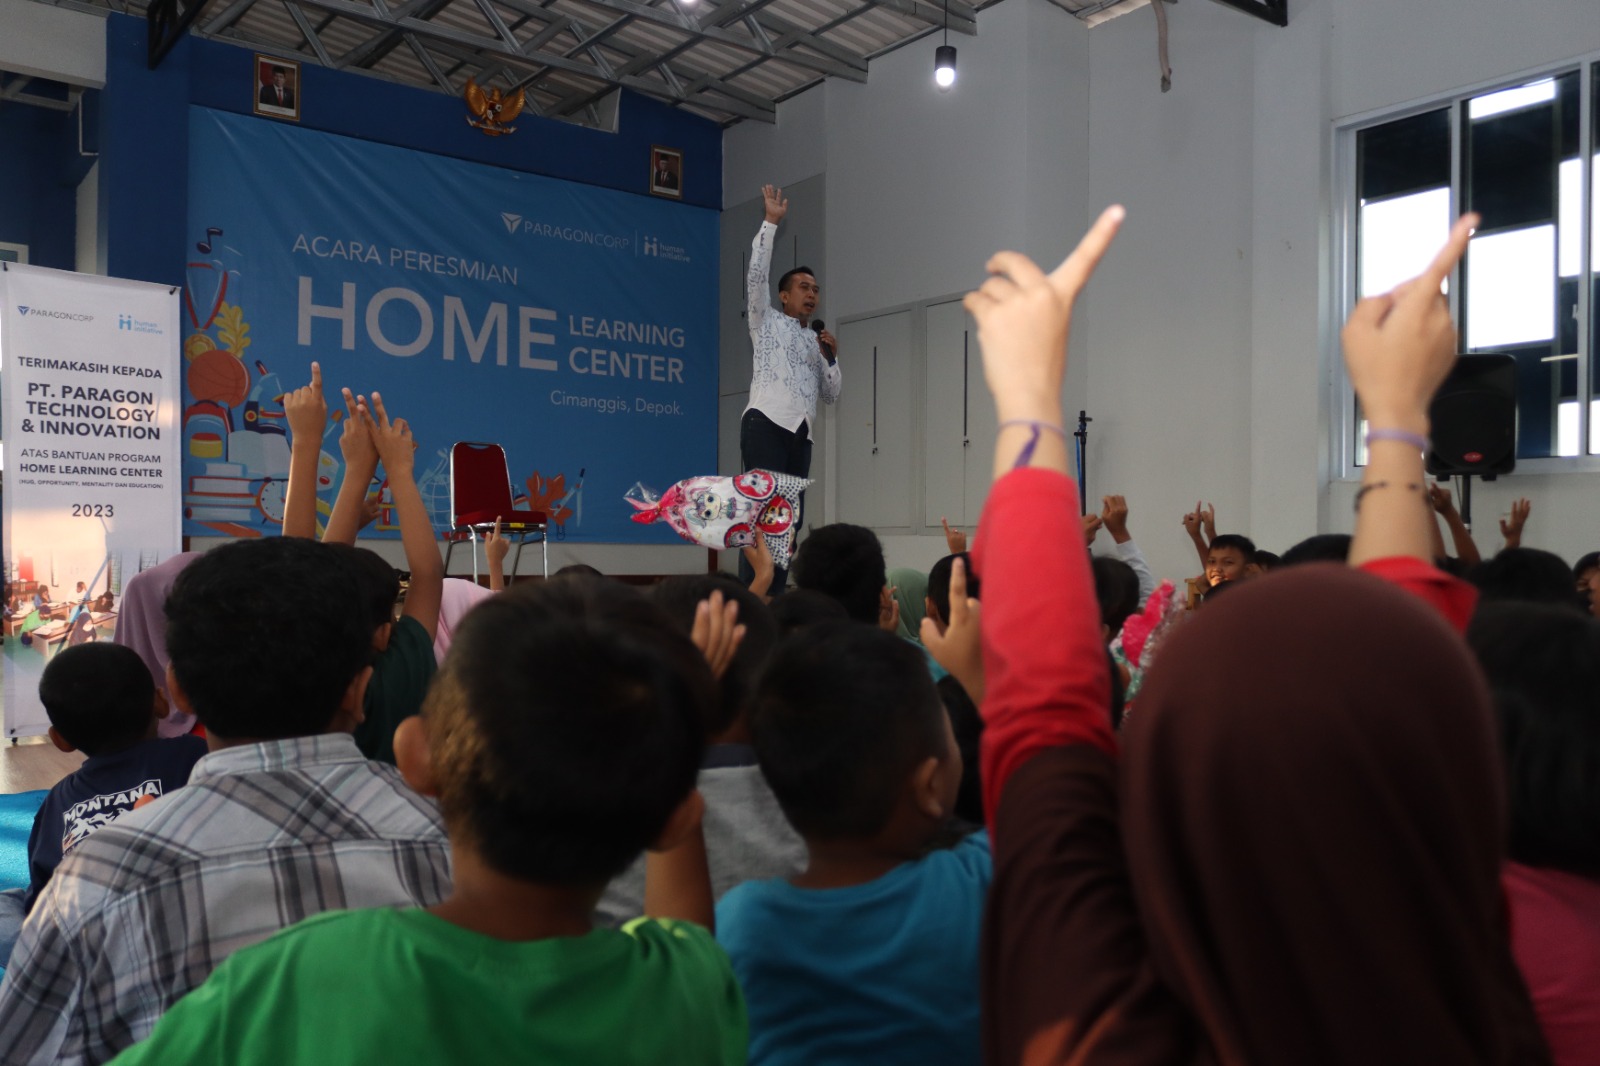 HOME Learning Center: Human Initiative Collaborates with Paragon Group to Foster Kindness